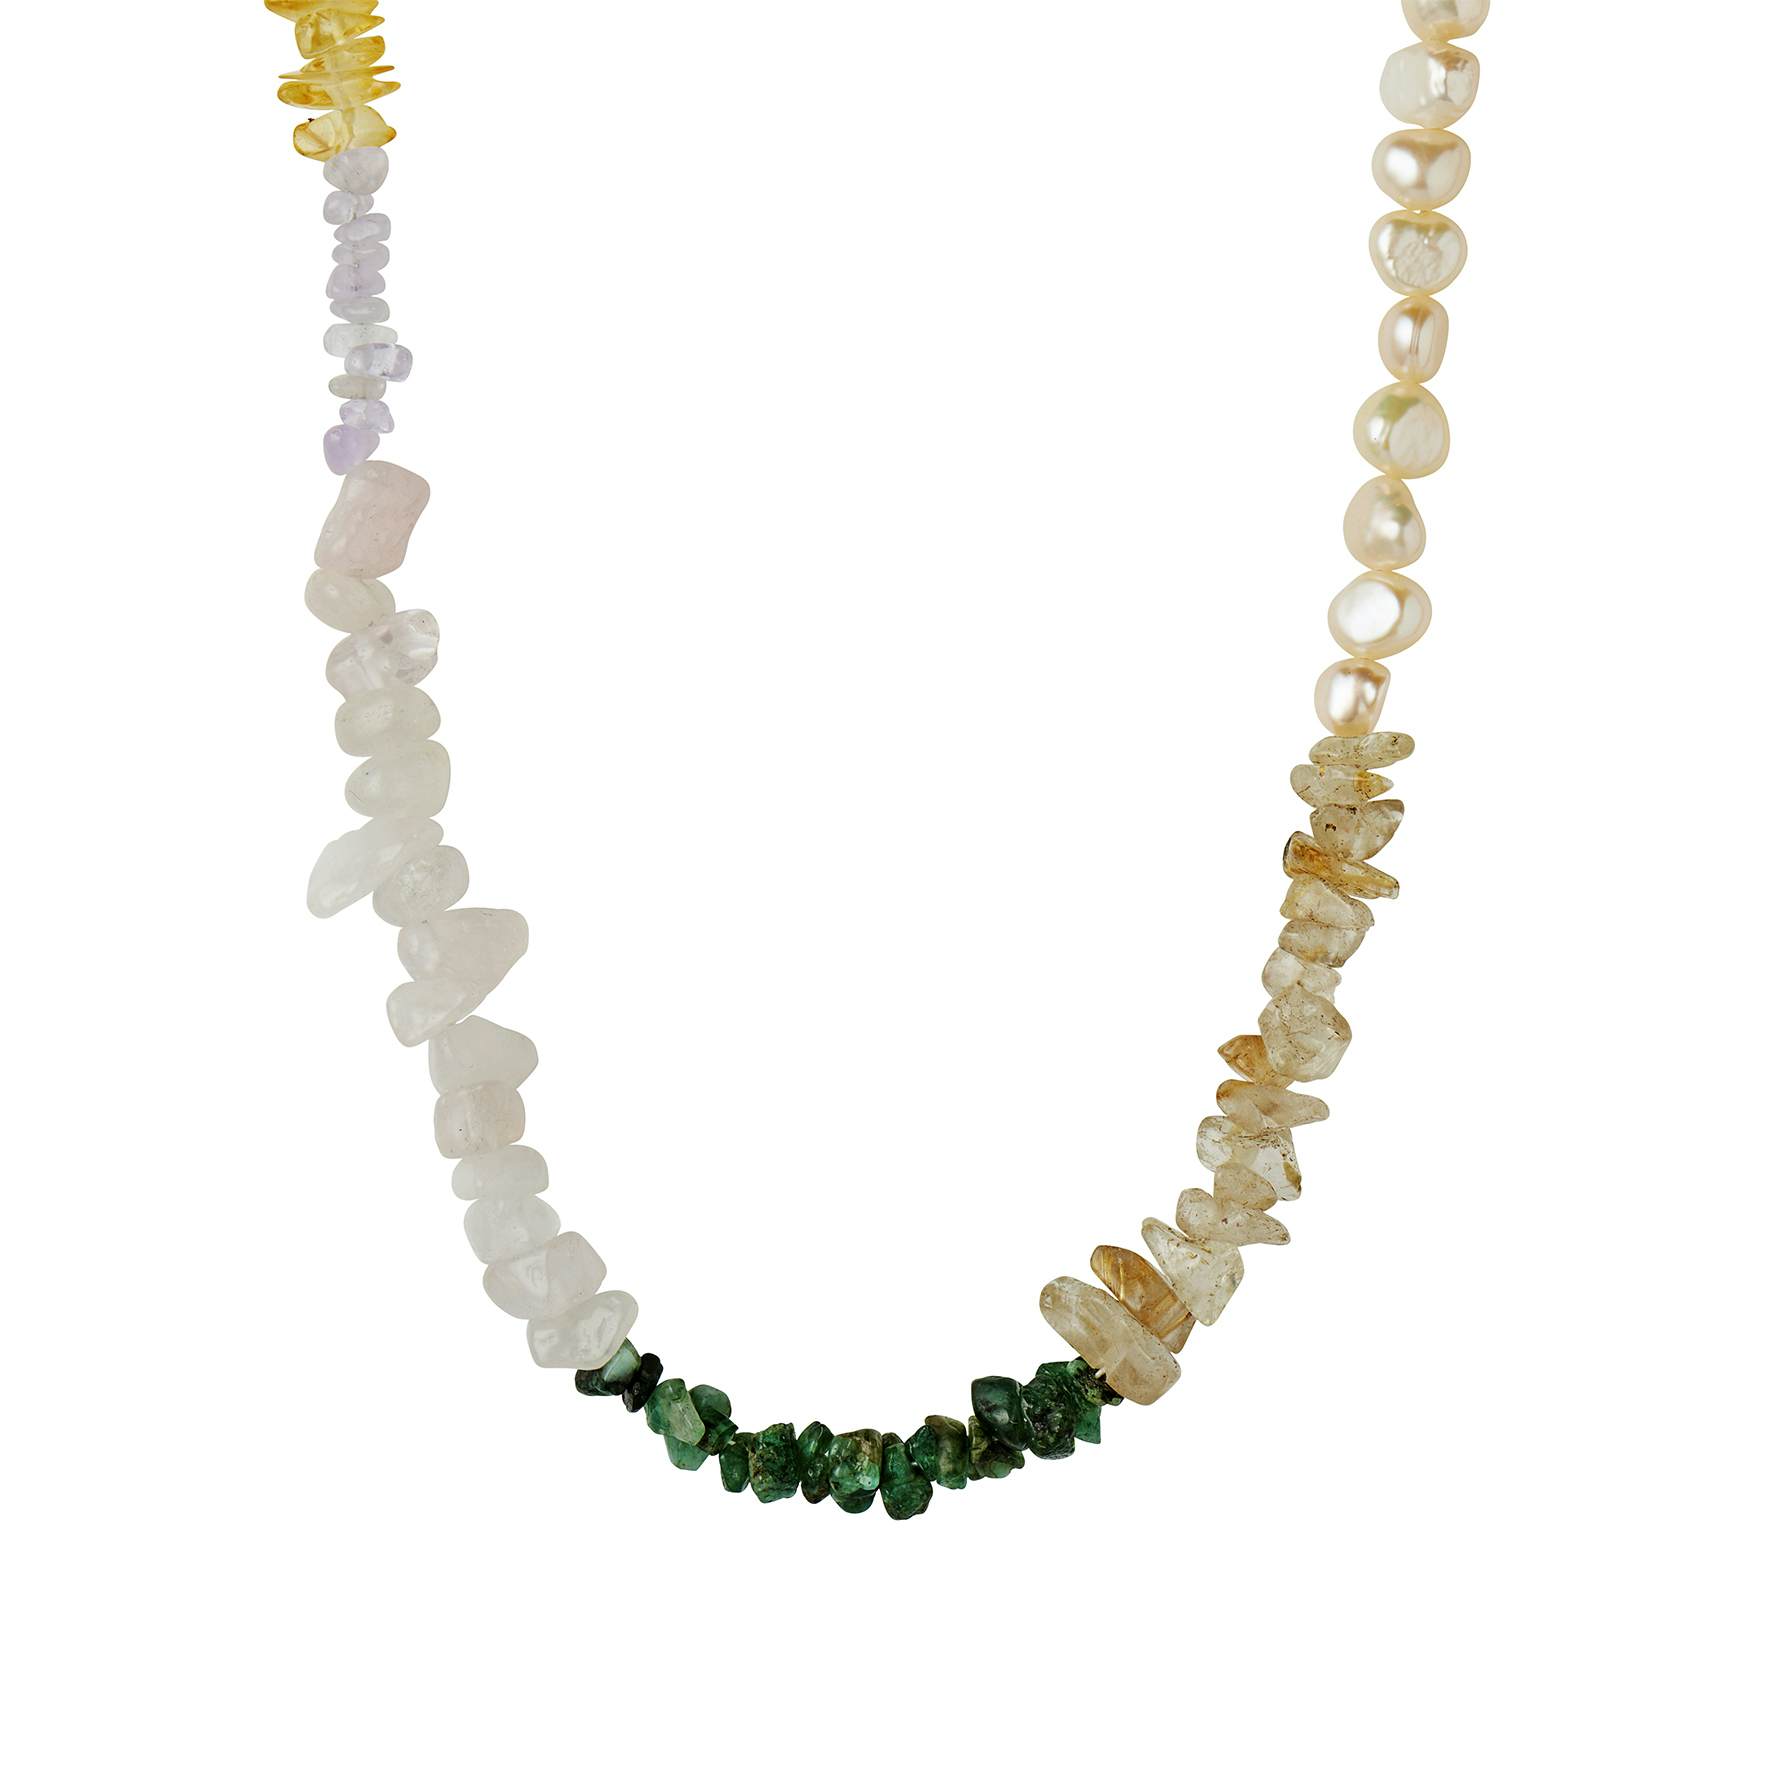 Crispy Coast Necklace - Pacific Colors With Pearls & Gemstones from STINE A Jewelry in Goldplated-Silver Sterling 925